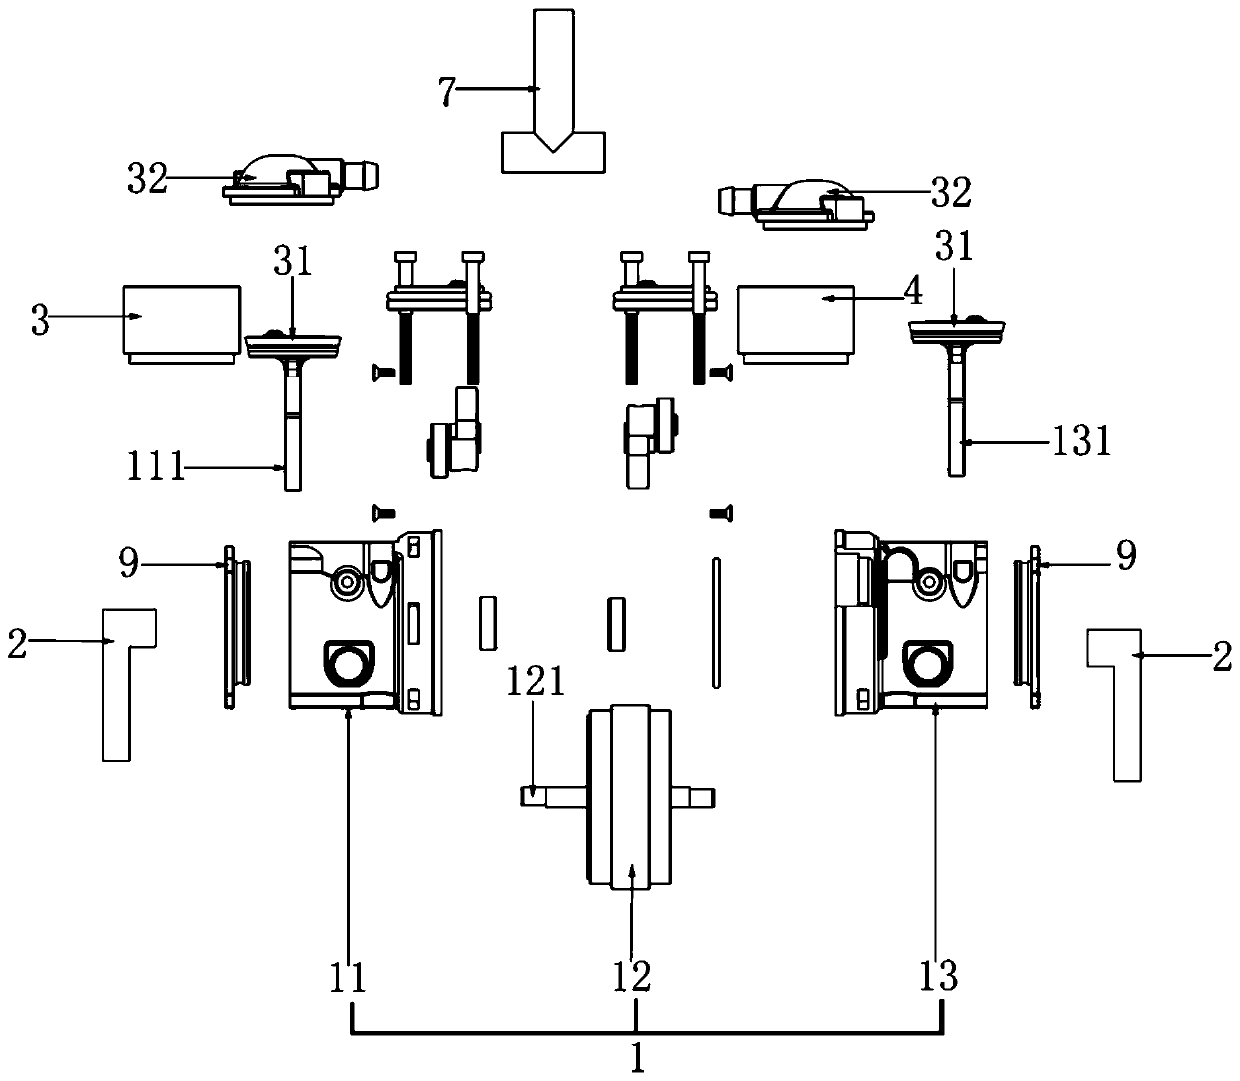 Micro oil-free double-cylinder compressor